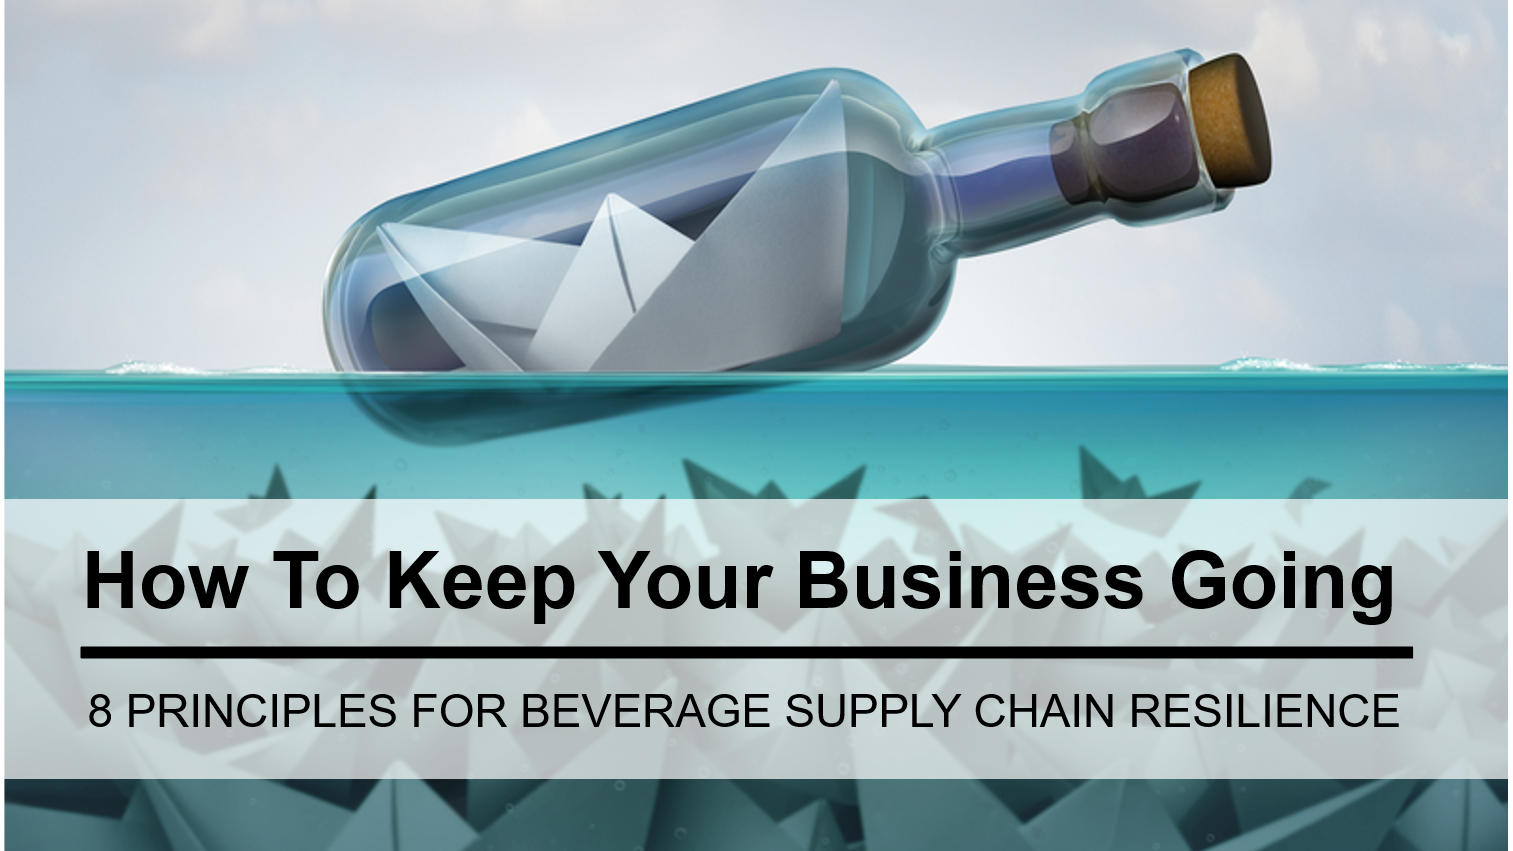 Beverage Supply Chain Resilience